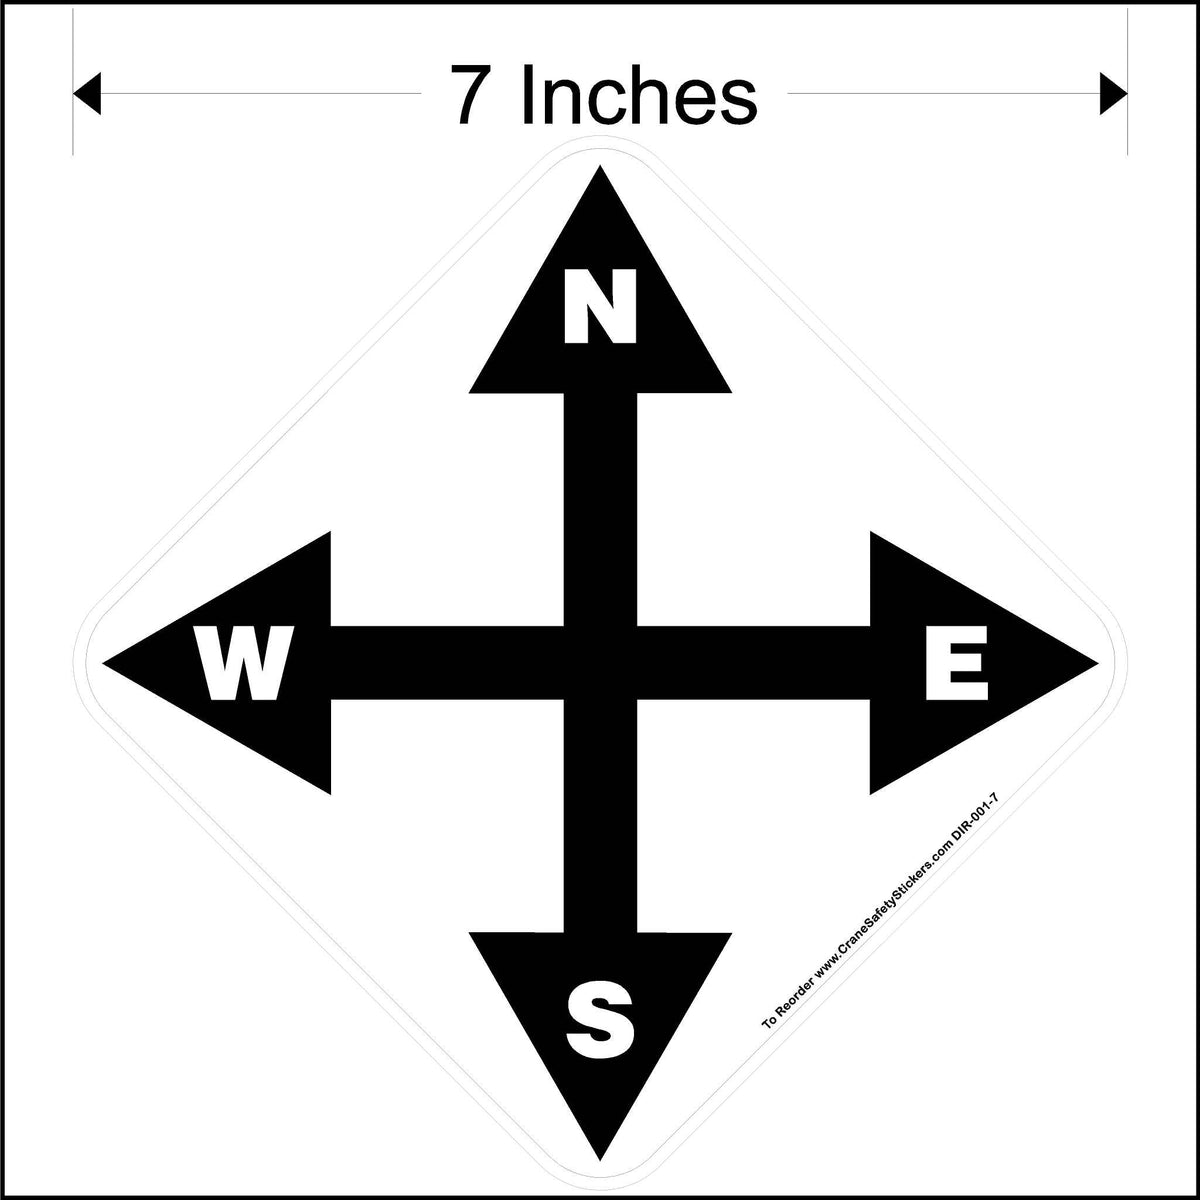 7 Inch North South East West Overhead Crane Directional Decal.